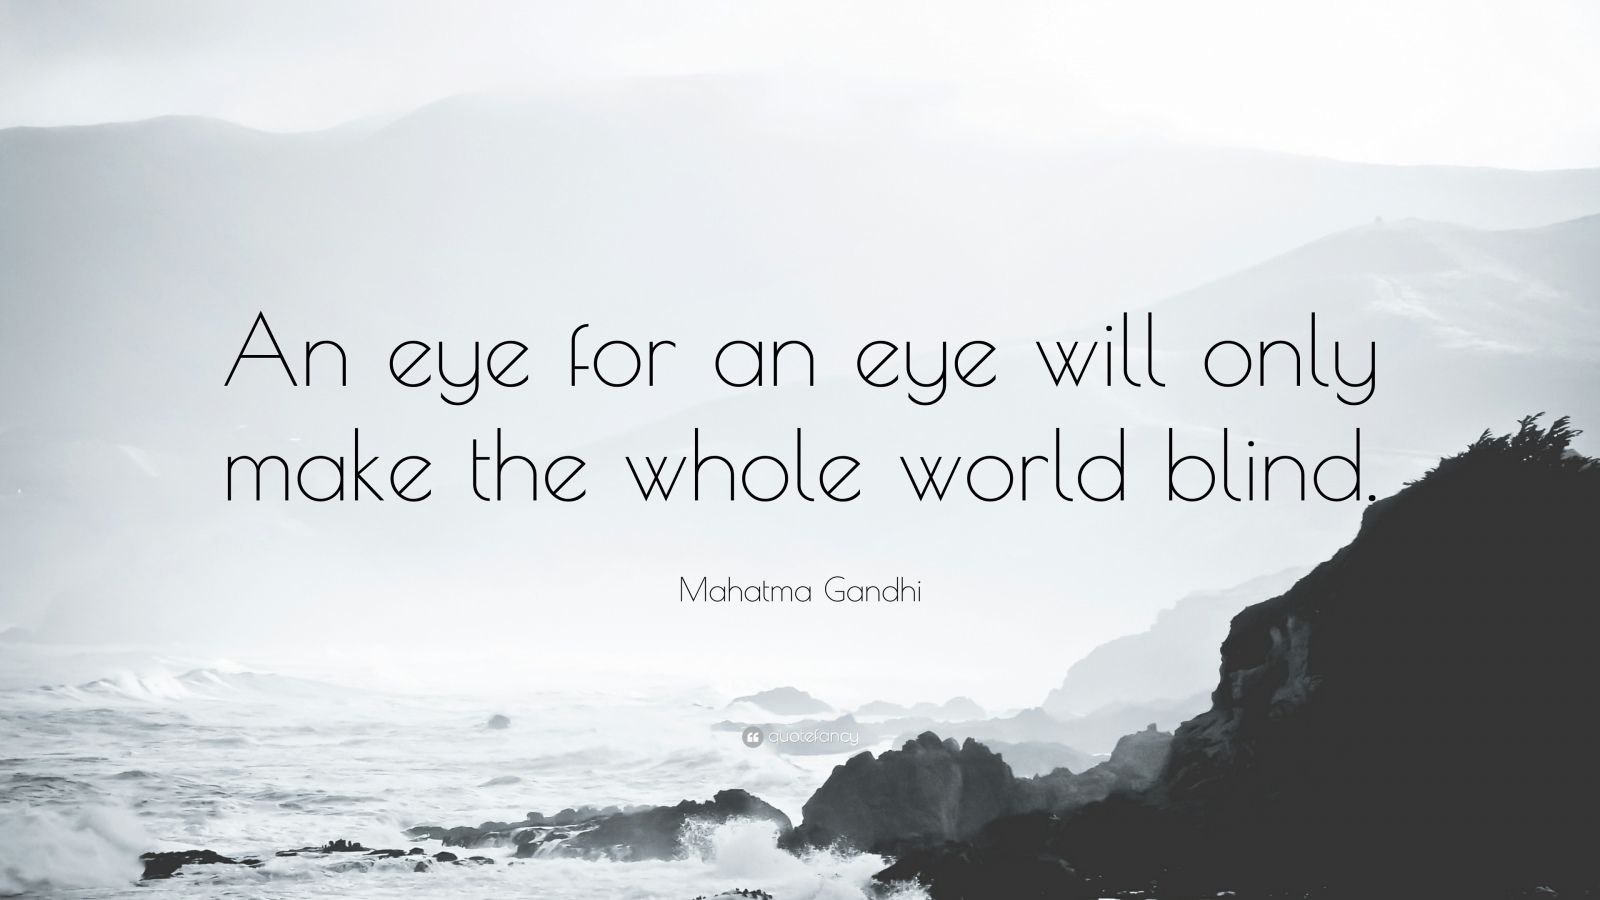 an eye for an eye makes the whole world blind but